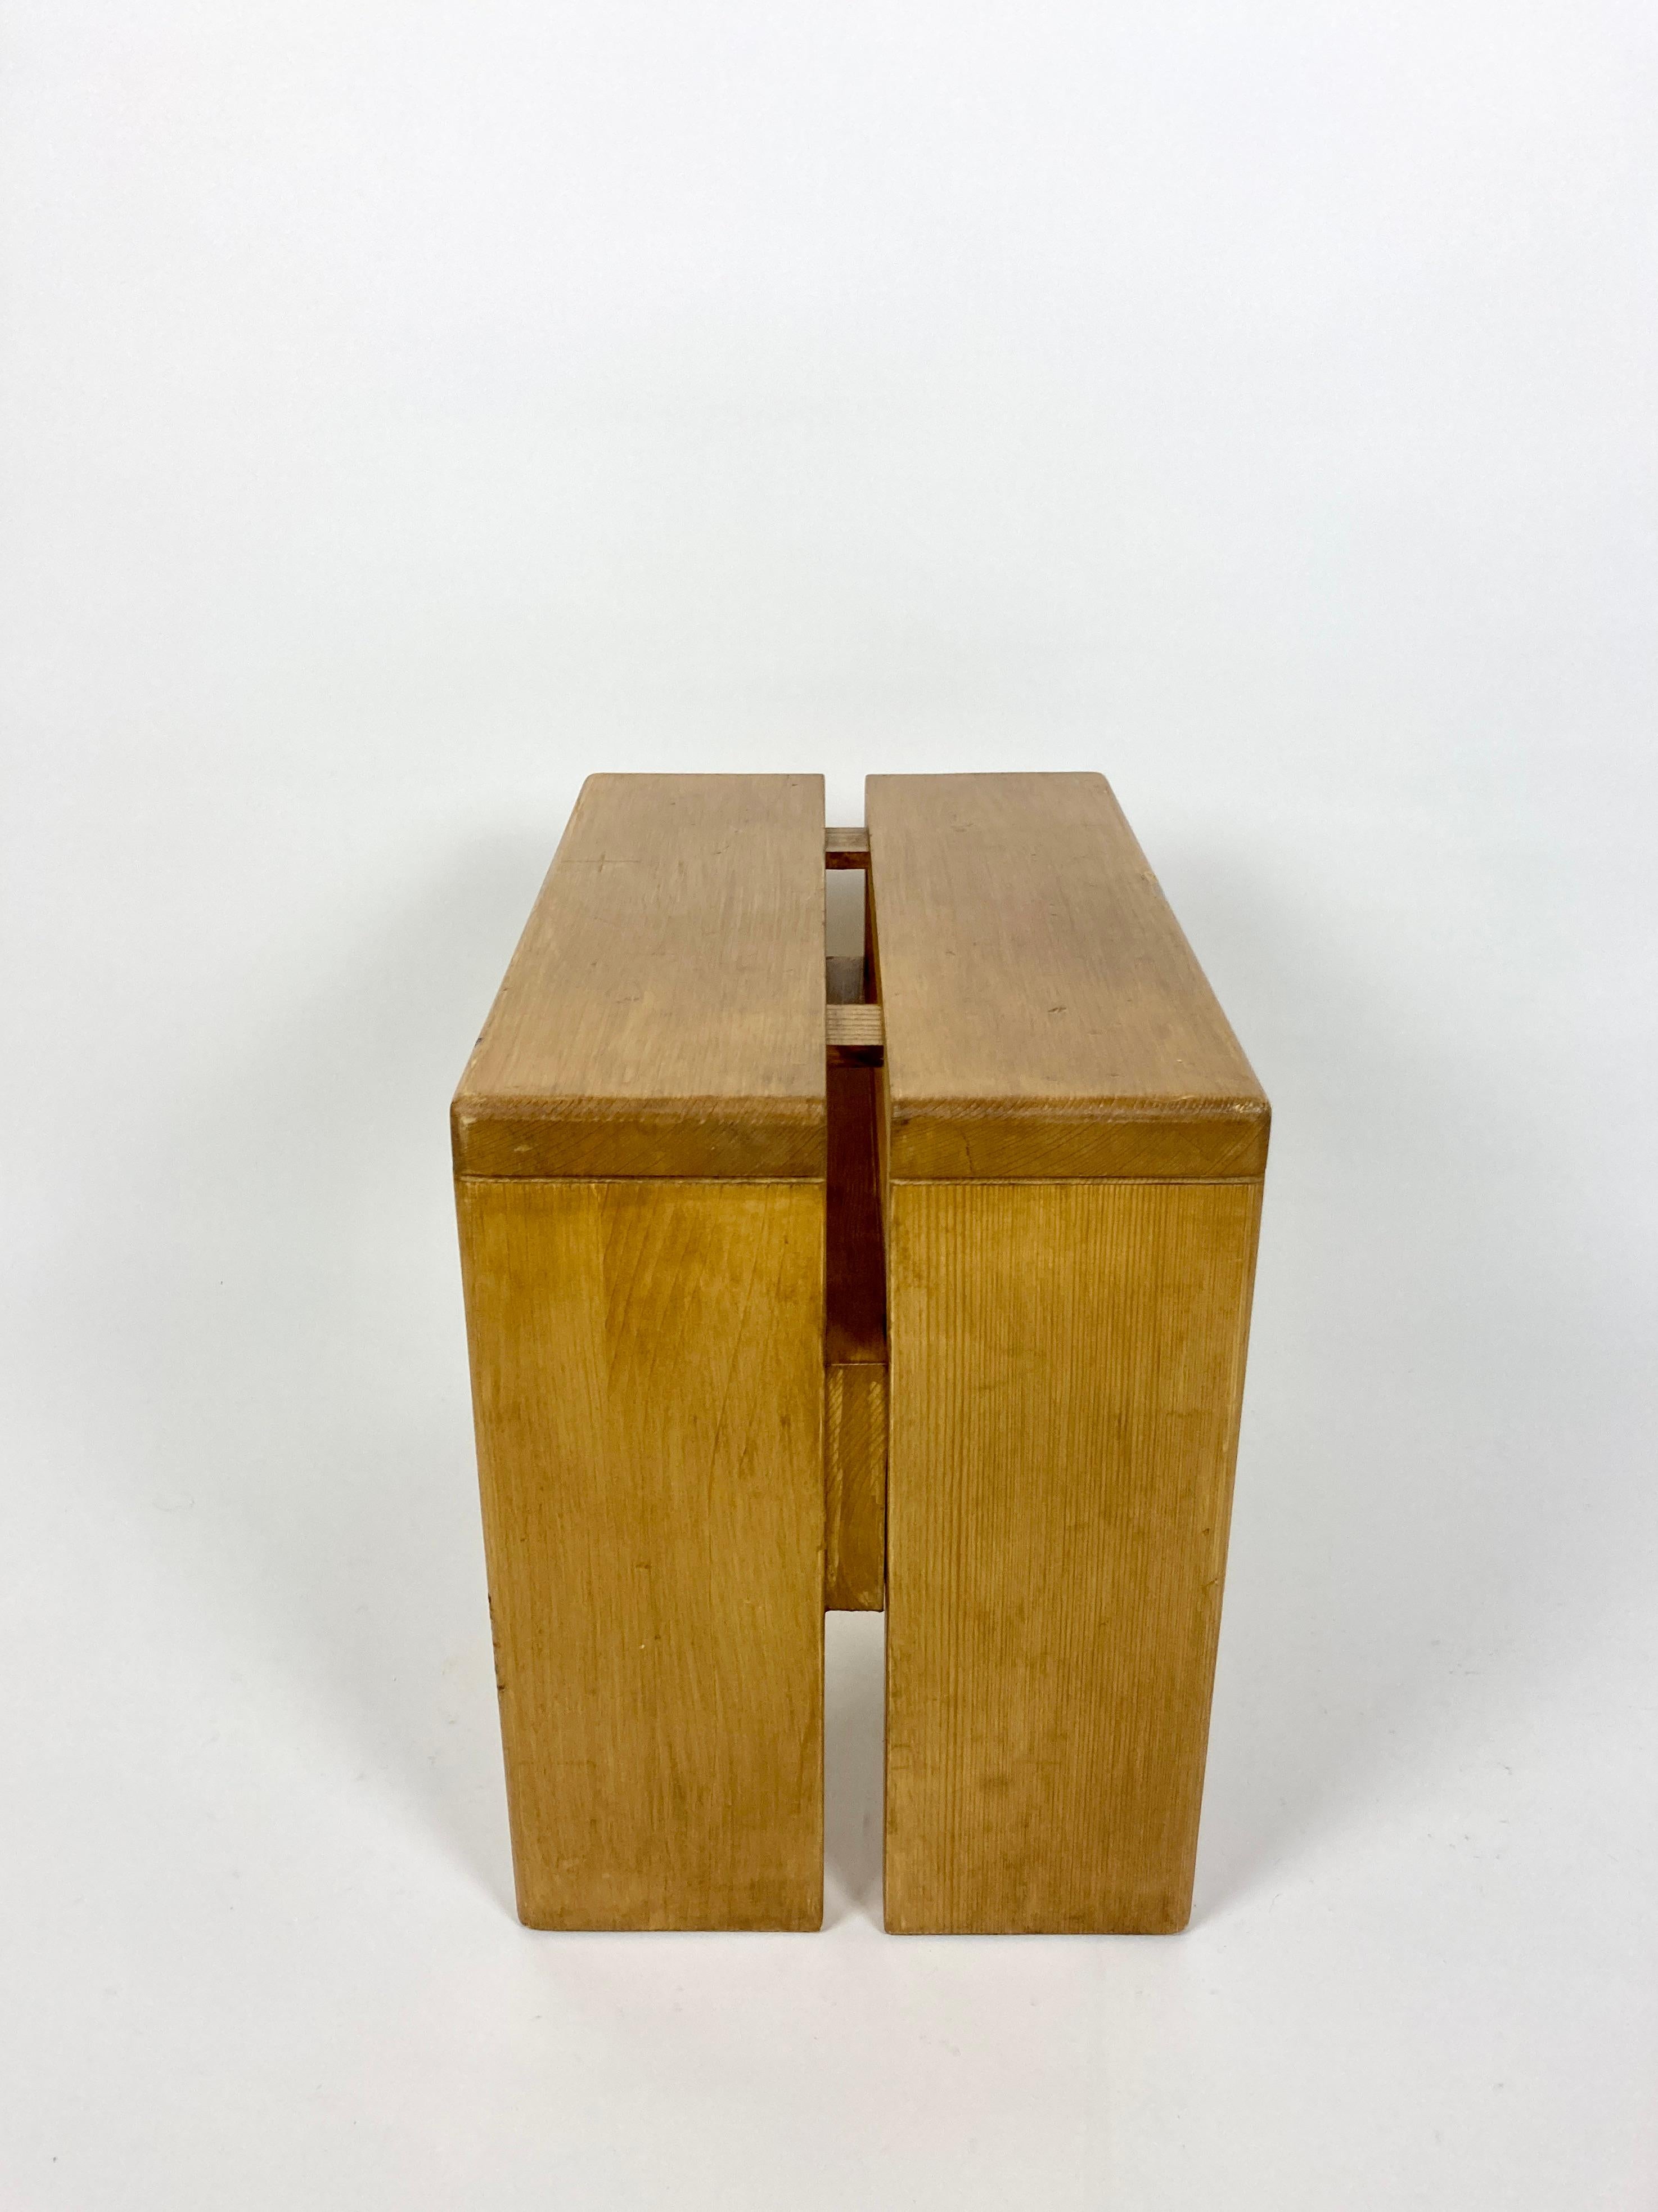 20th Century Stools/Side Table from Les Arcs, France 1970s, Charlotte Perriand